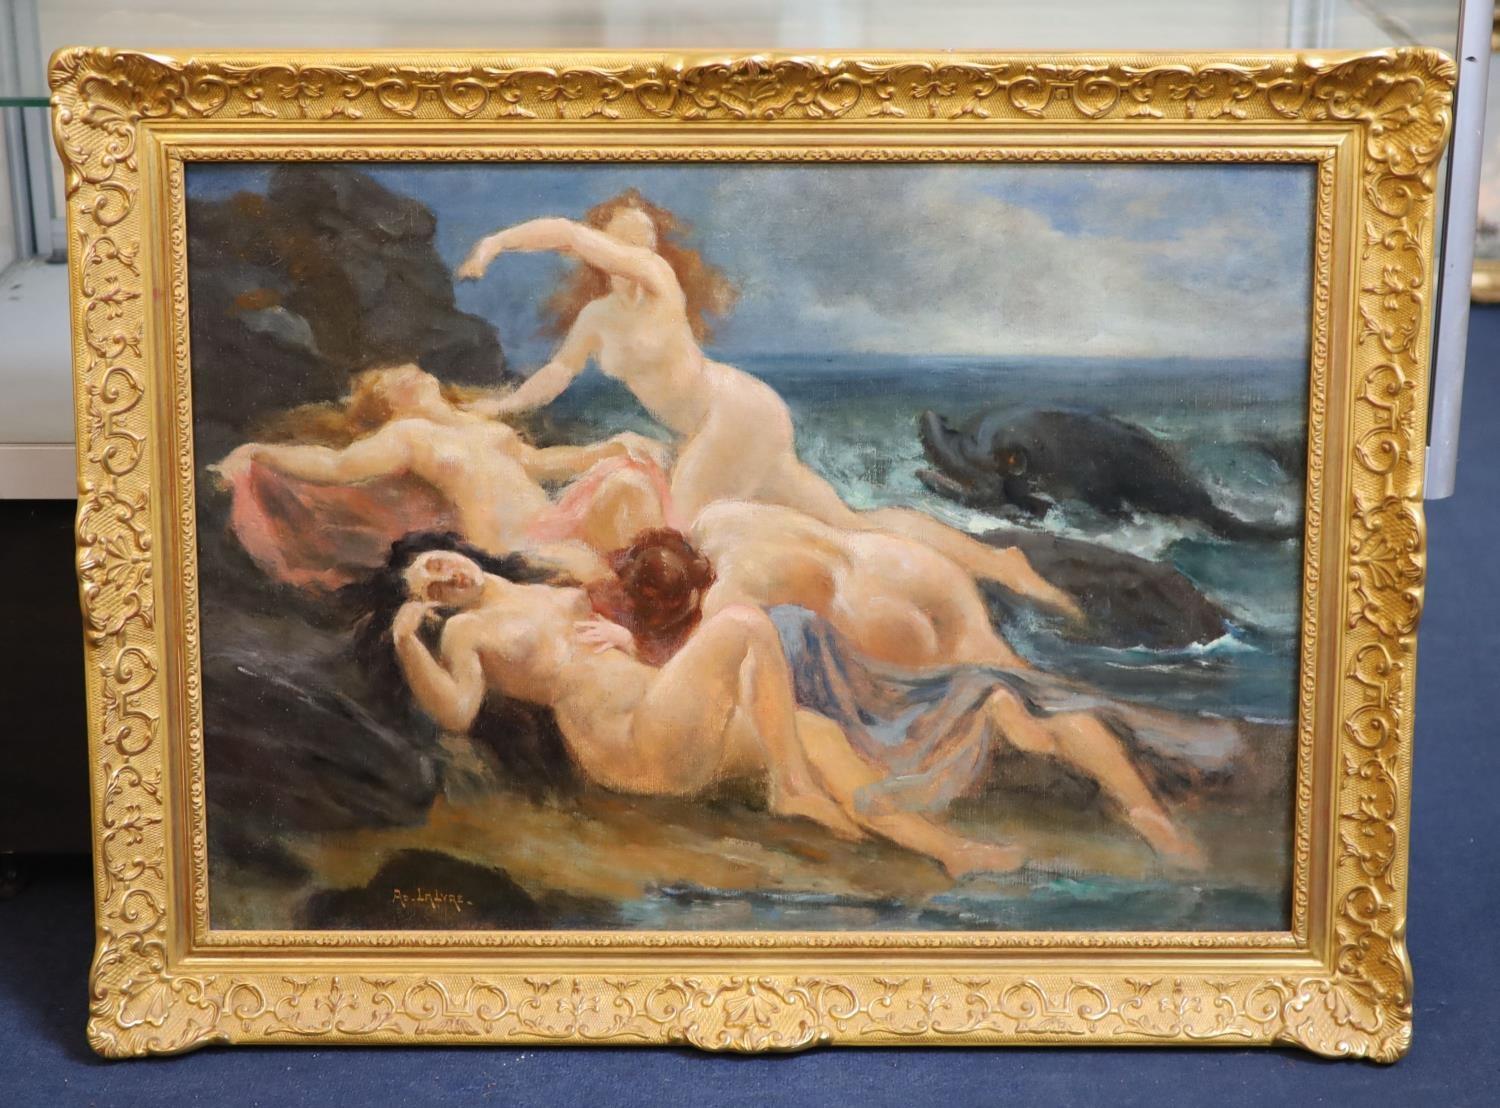 Artist/ School:  Adolphe Lalyre (French, 1848-1933) 

Title:  Sirens and dolphin beside rocks

Medium: signed oil on canvas, framed.

canvas size: 21.5 x 31 inches plus the frame

Condition: The painting is in overall very good and sound condition.